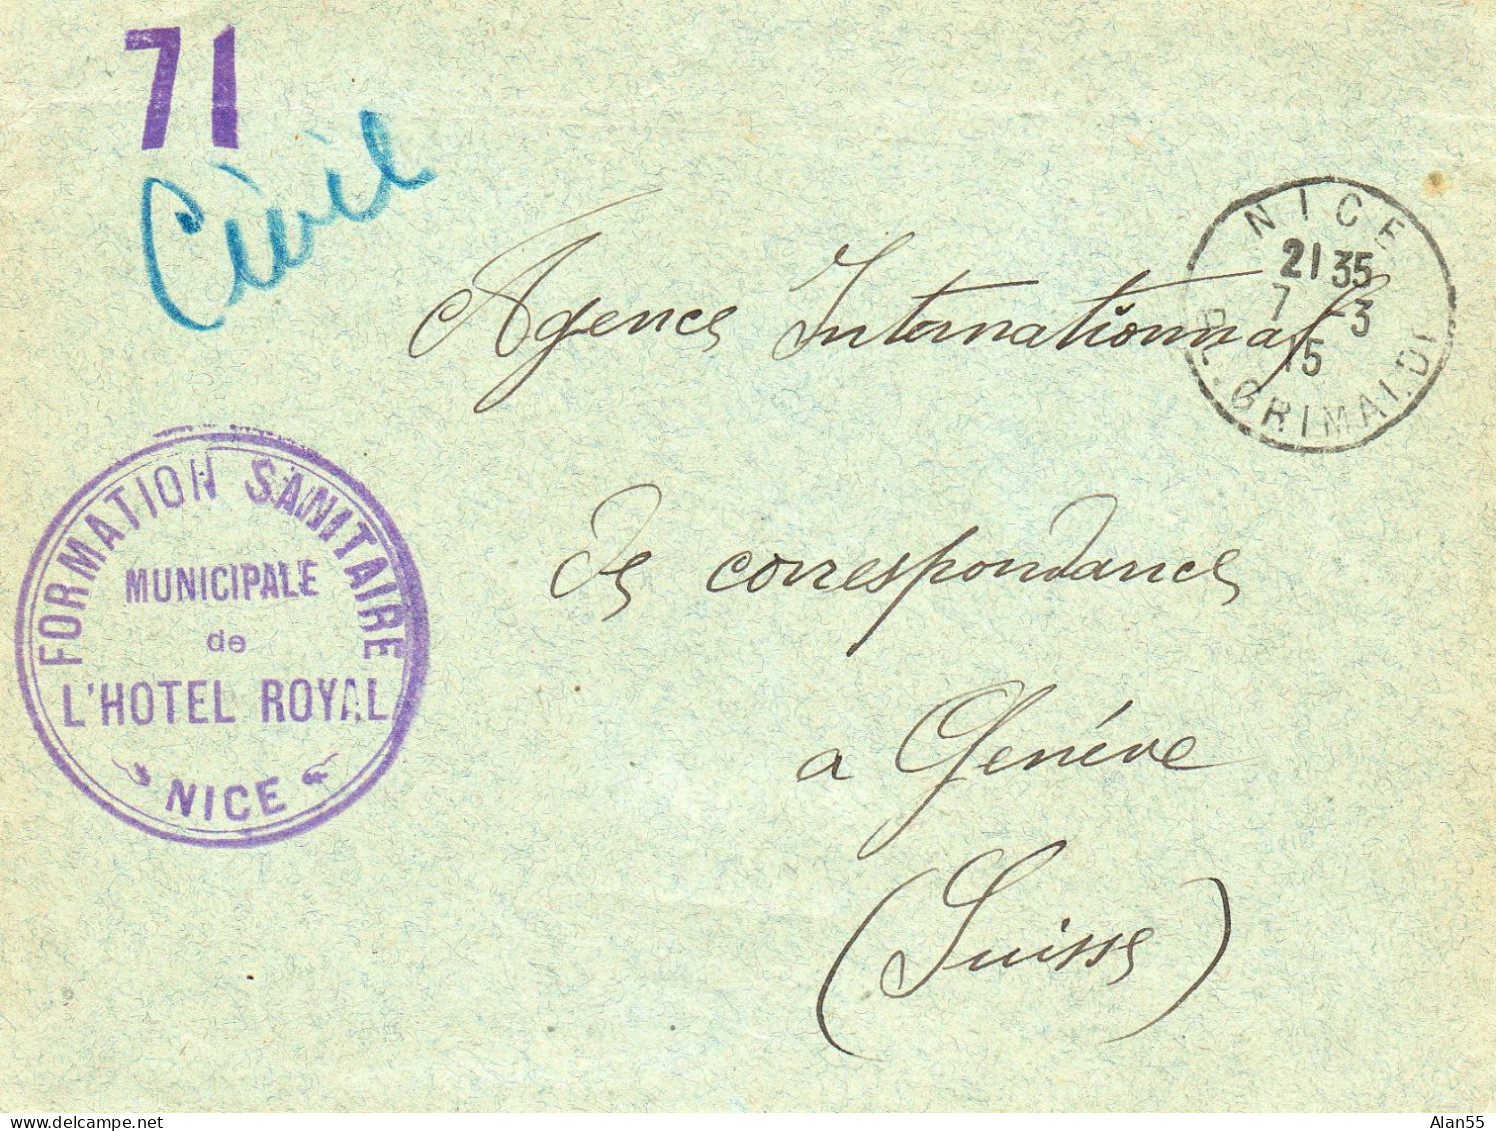 1915.F.M.APG GENEVE (SUISSE)."FORMATION SANITAIRE MUNICIPALE HOTEL ROYAL". NICE (ALPES MARITIMES). - WW1 (I Guerra Mundial)